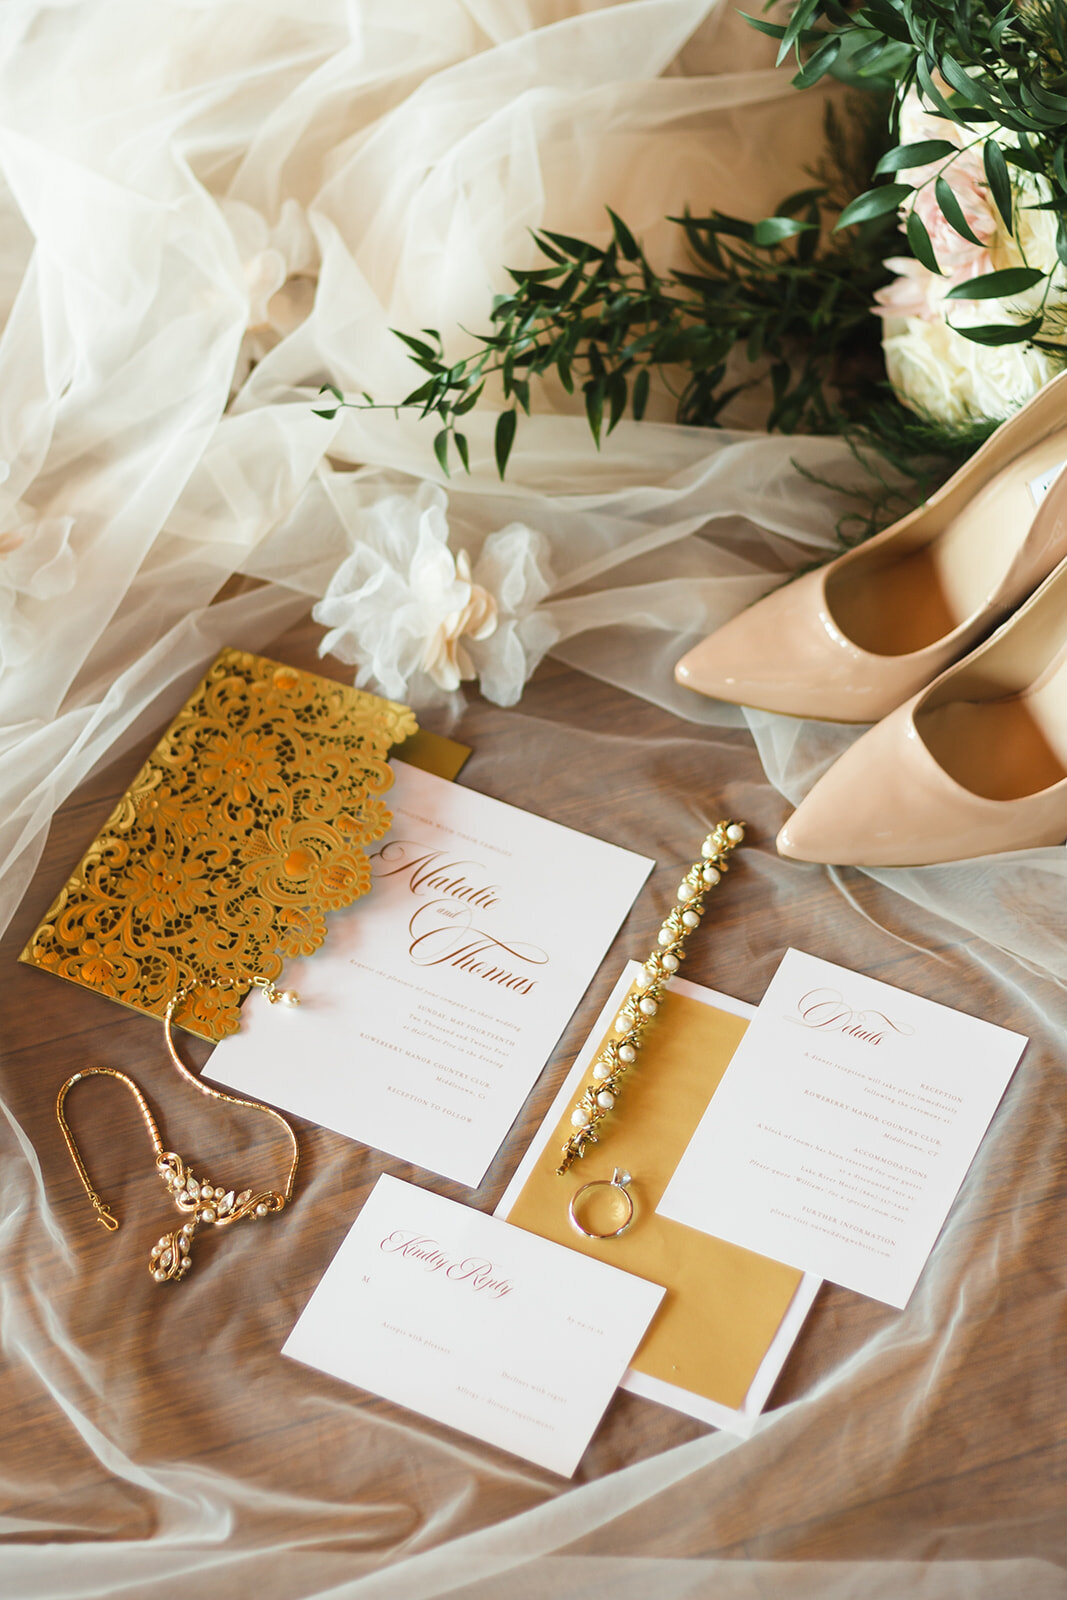 gold and invitations, bridal shoes, and other wedding details